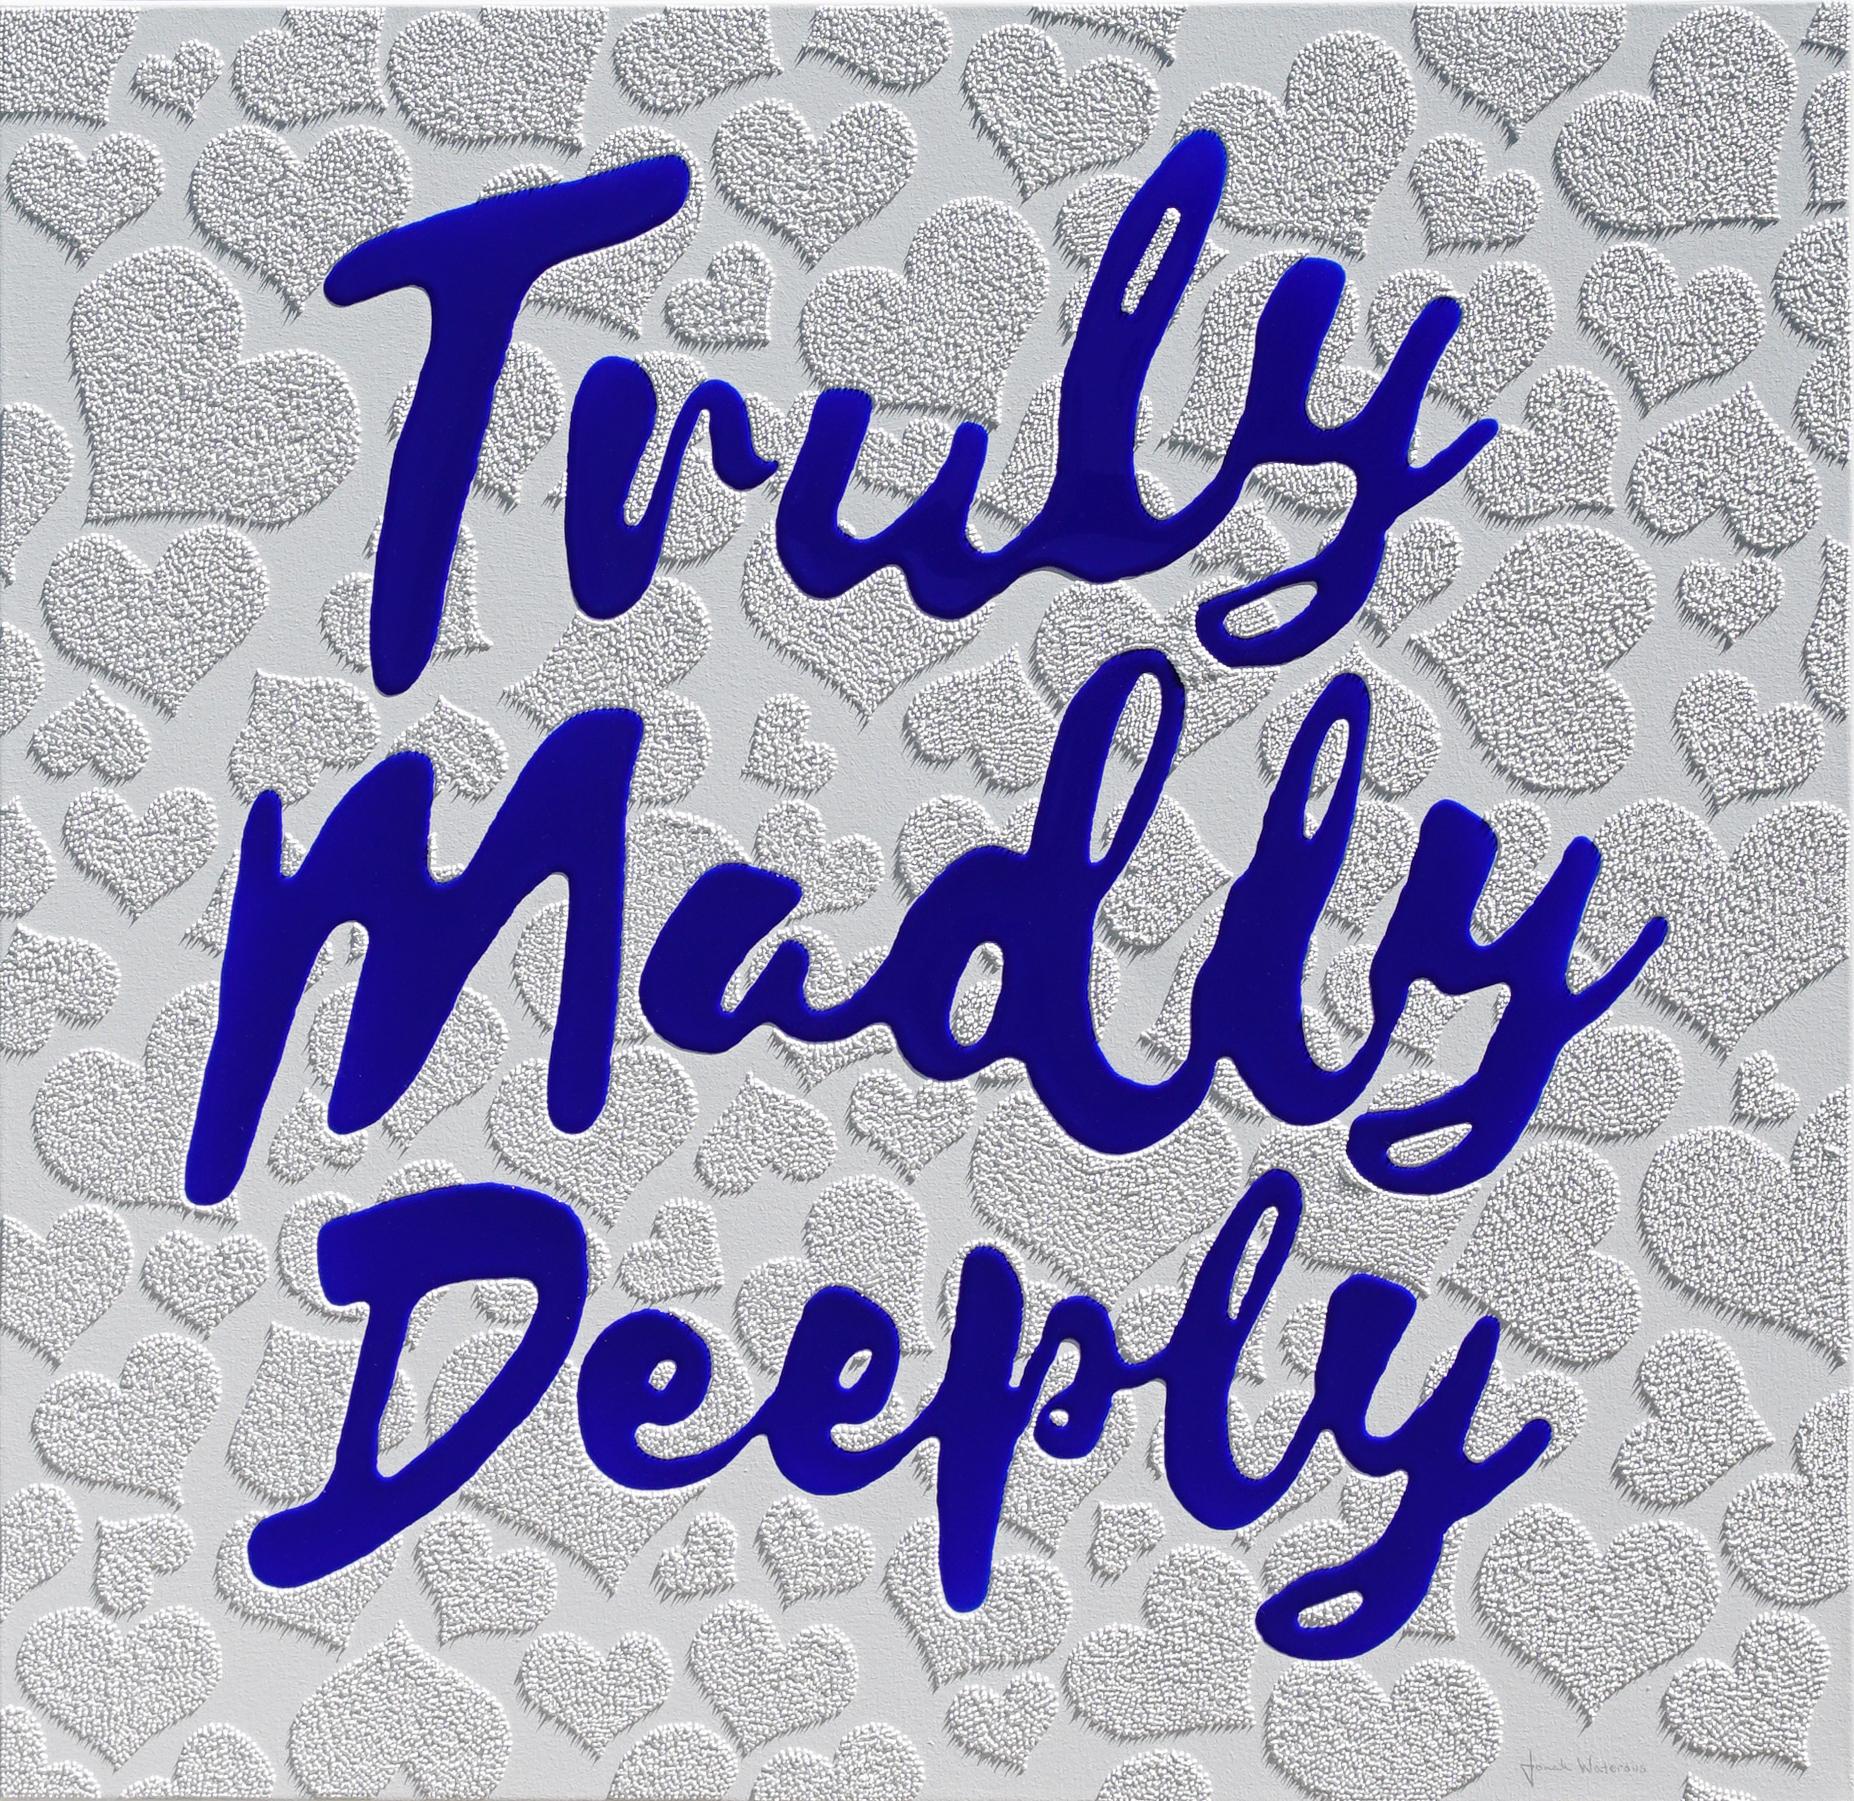 Truly Madly Deeply - Mixed Media Art by Jonah Waterous